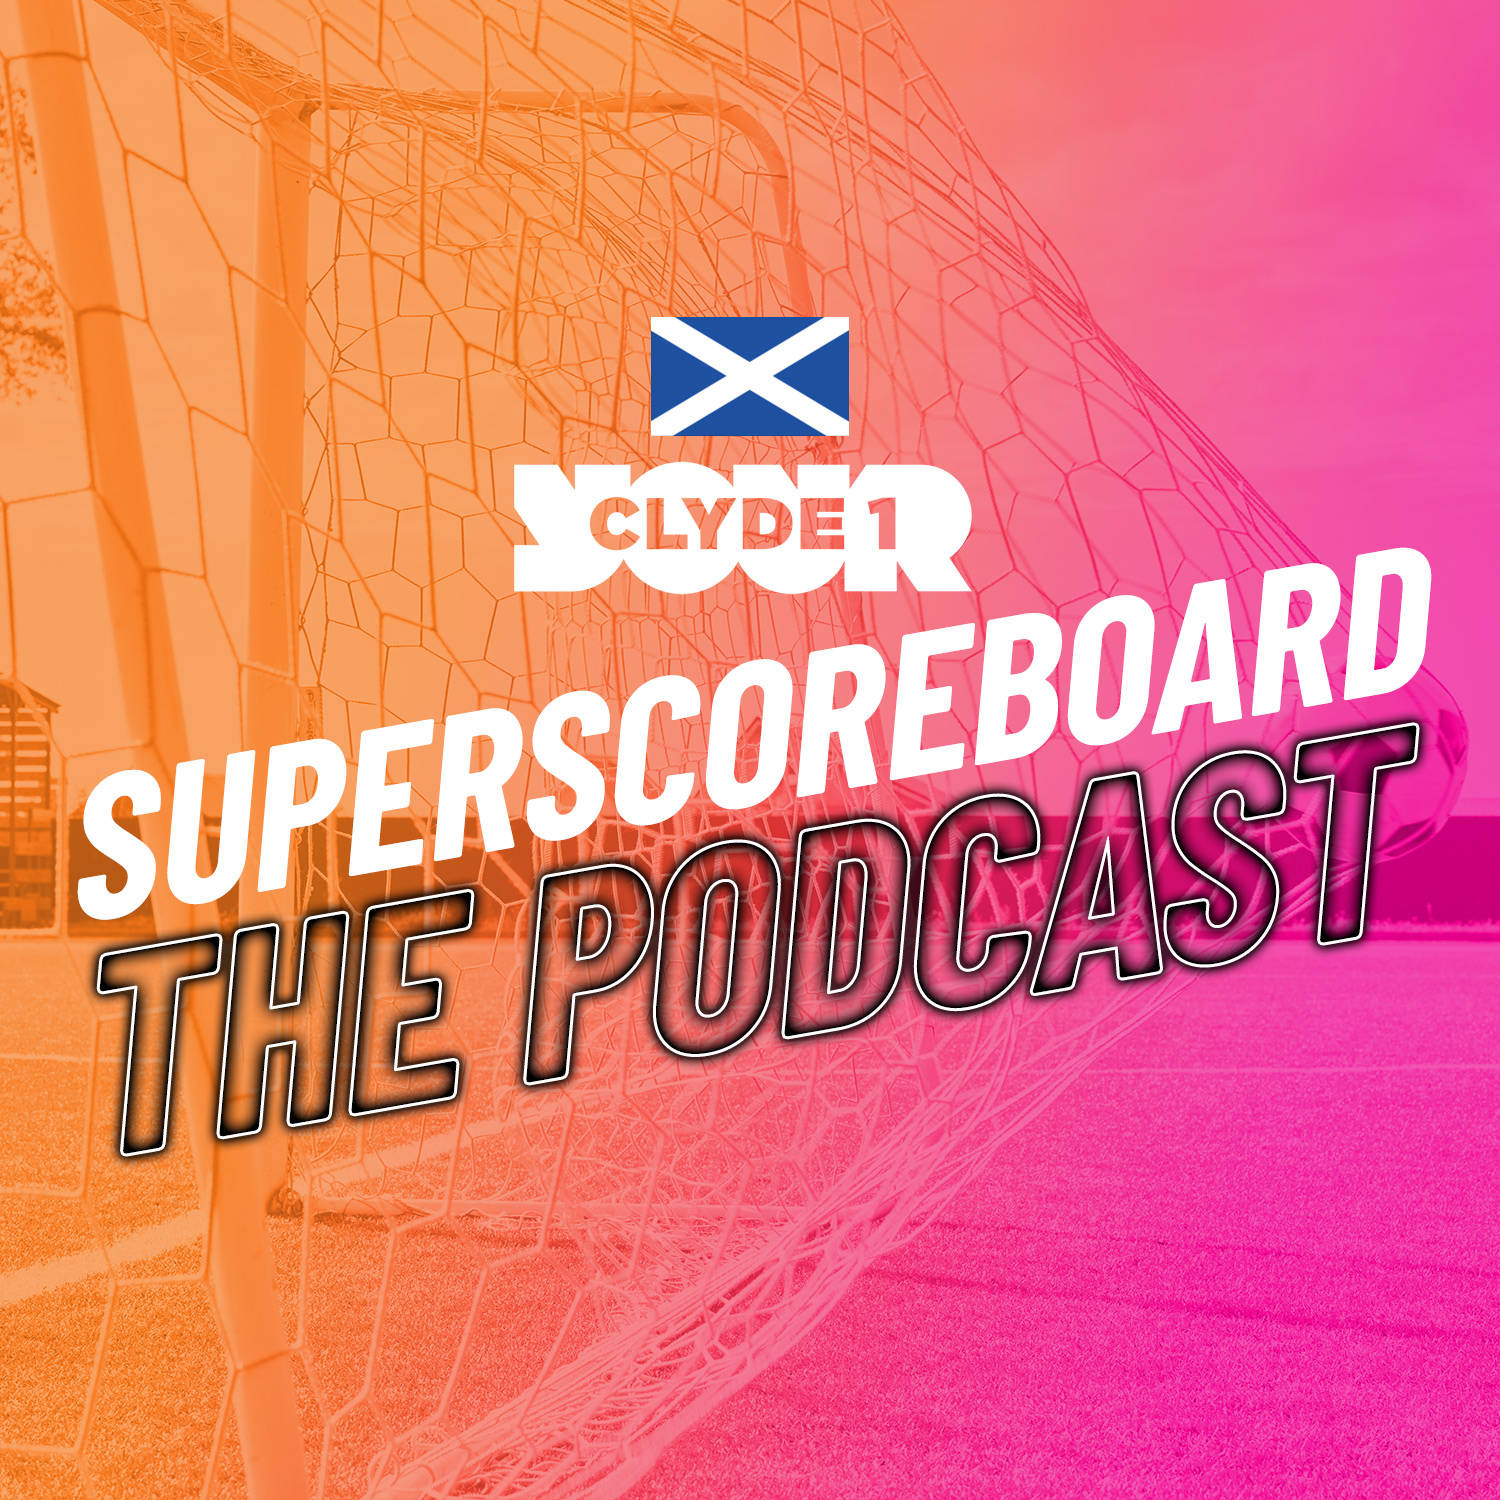 Tuesday 16th April Clyde 1 Superscoreboard